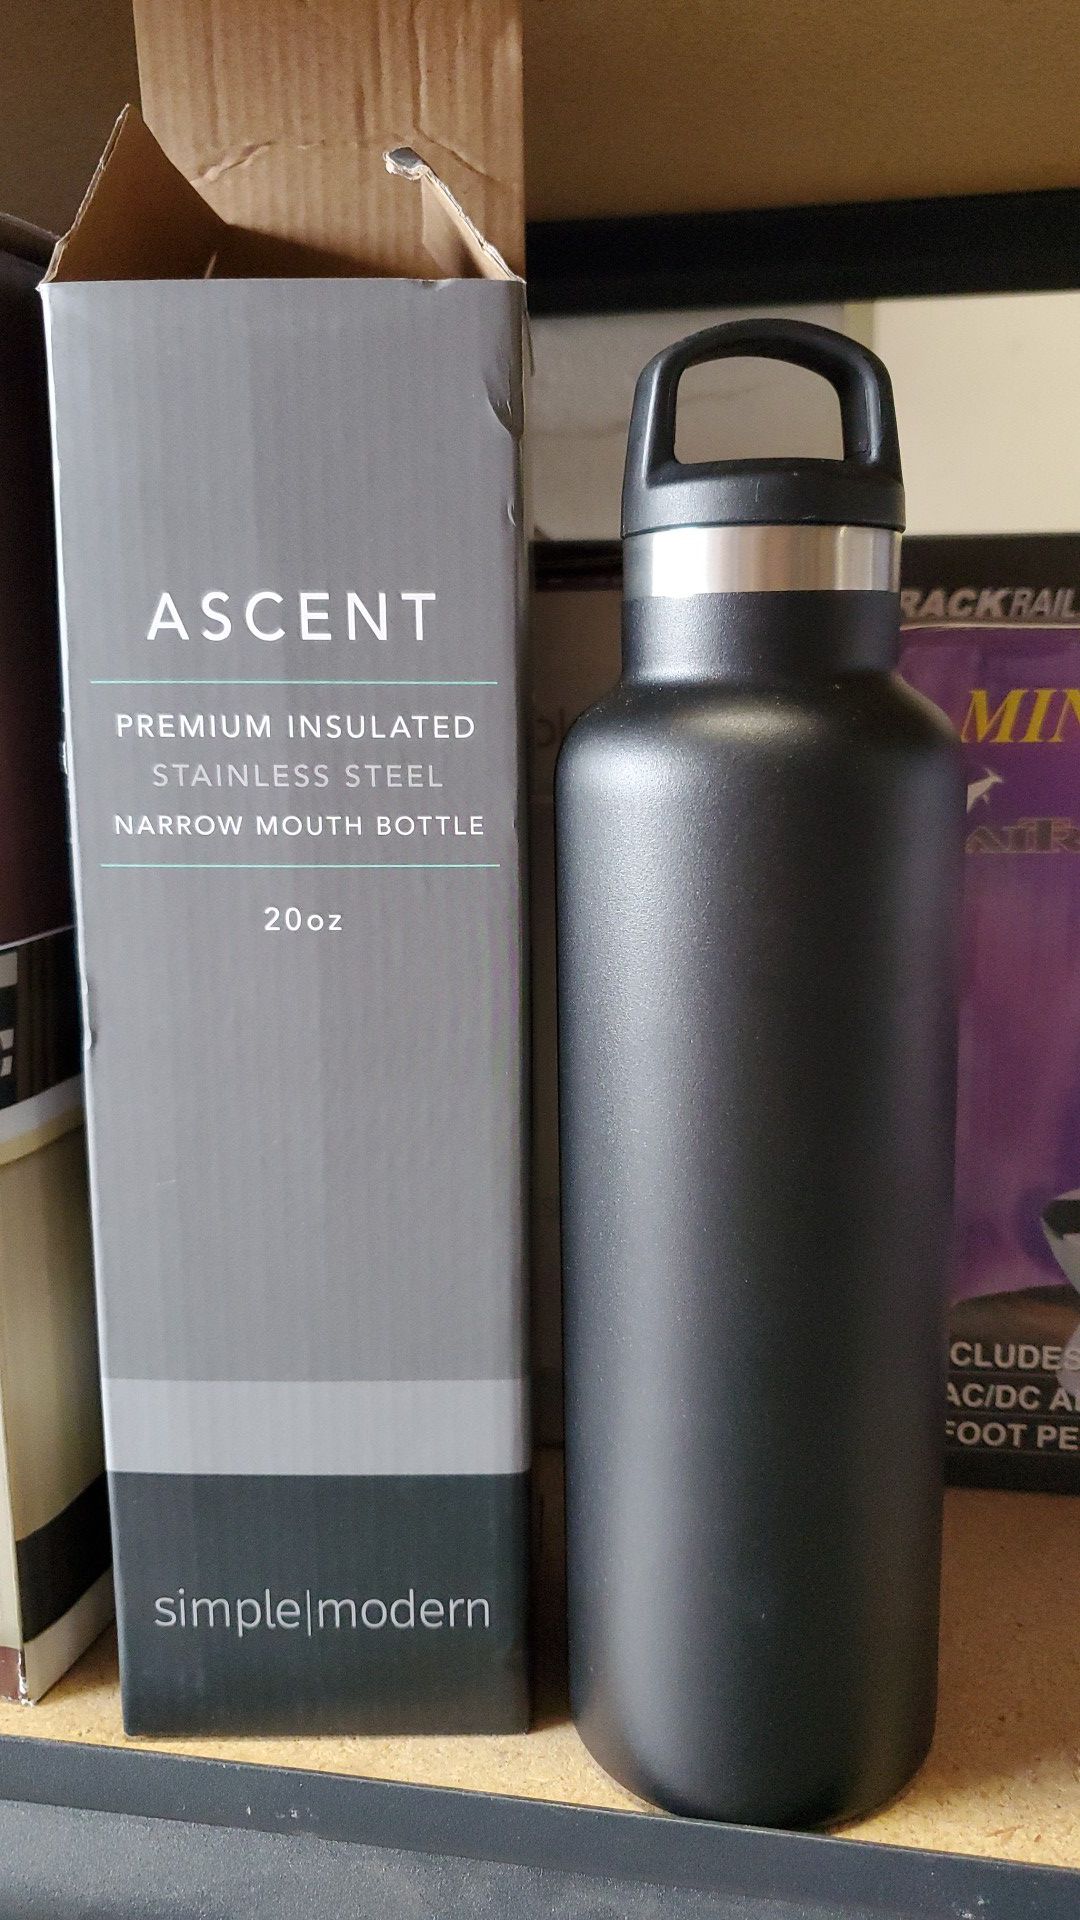 Ascent premium insulated stainless steel narrow mouth bottle 20 oz